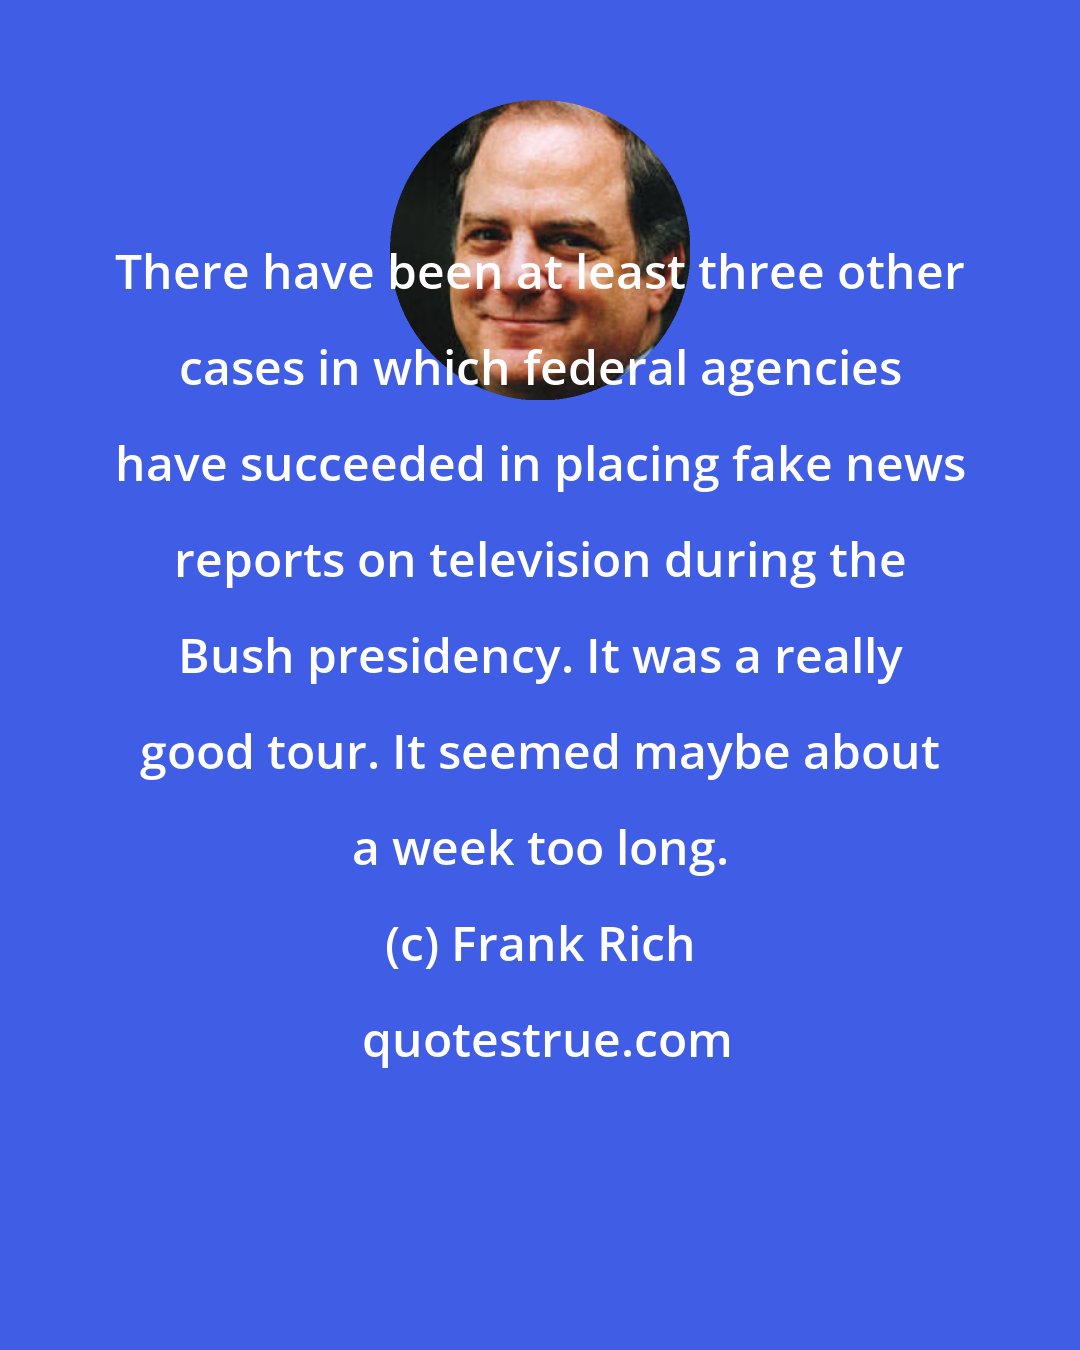 Frank Rich: There have been at least three other cases in which federal agencies have succeeded in placing fake news reports on television during the Bush presidency. It was a really good tour. It seemed maybe about a week too long.